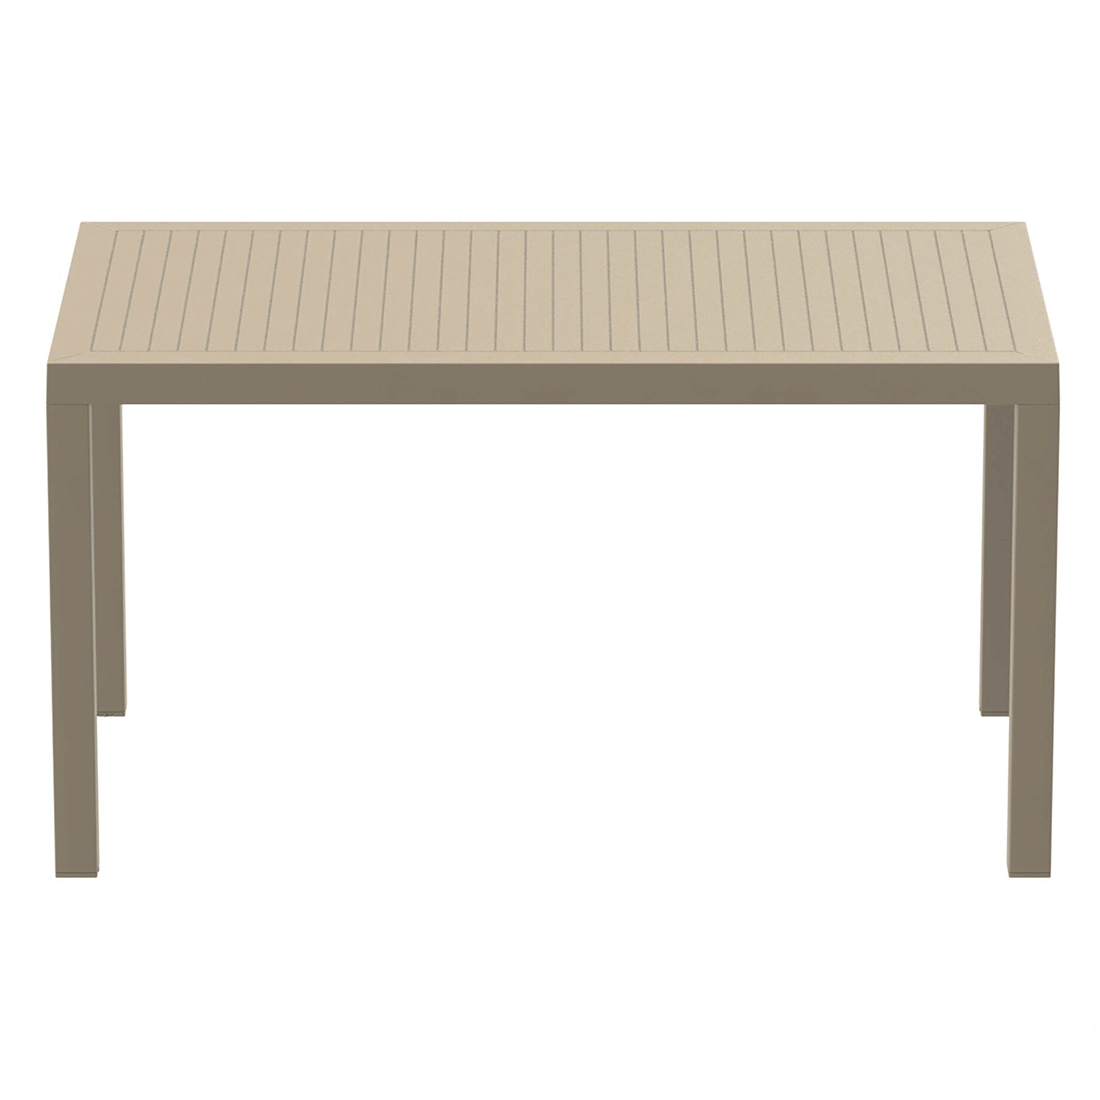 Ares 140 Table 1400×800